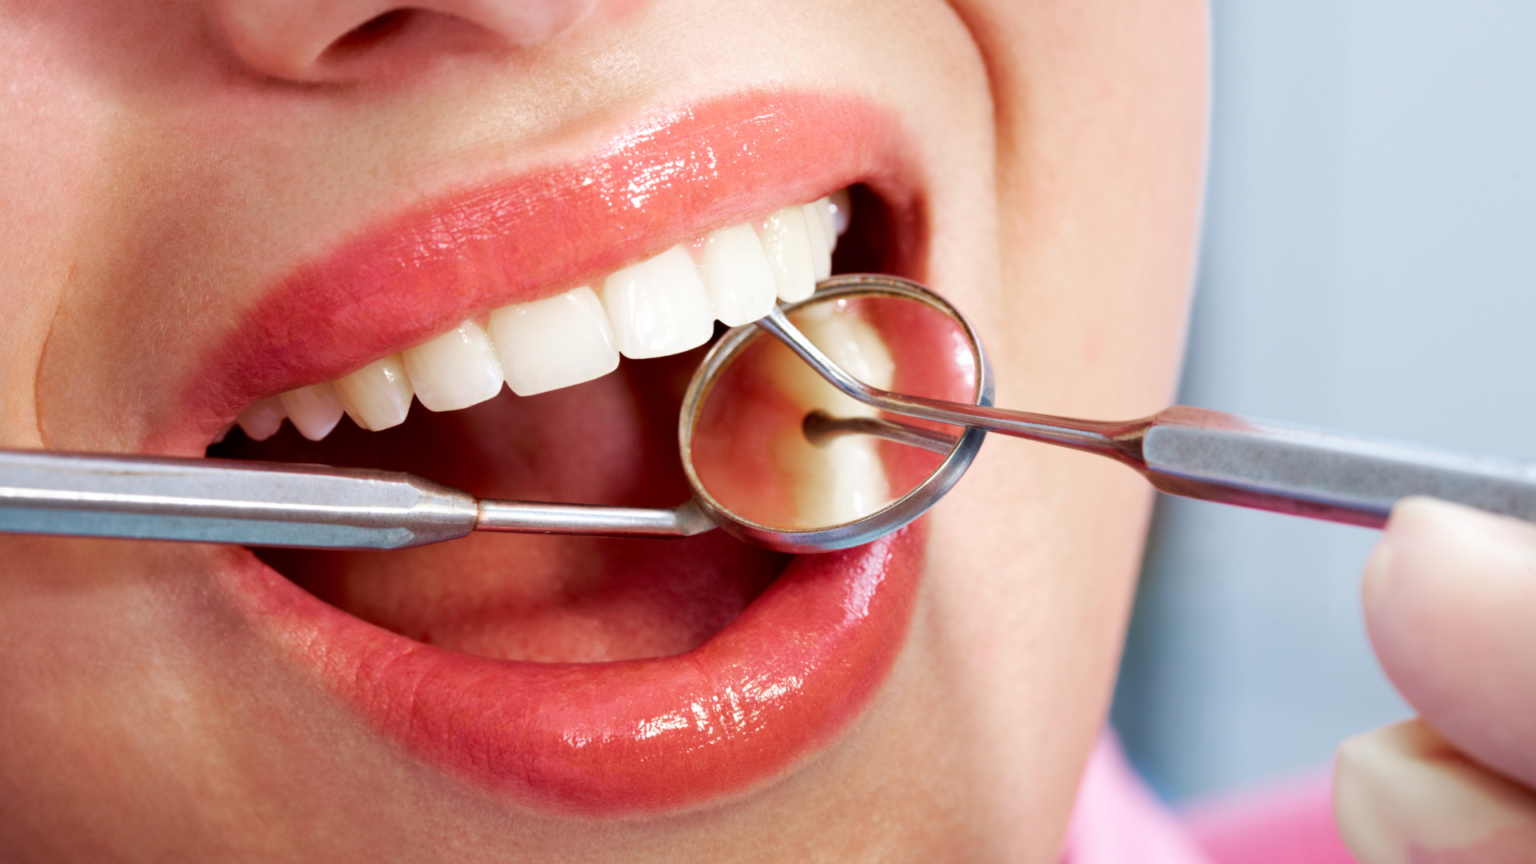 Dental Bonding: The Quick, Easy Way to a Great Smile